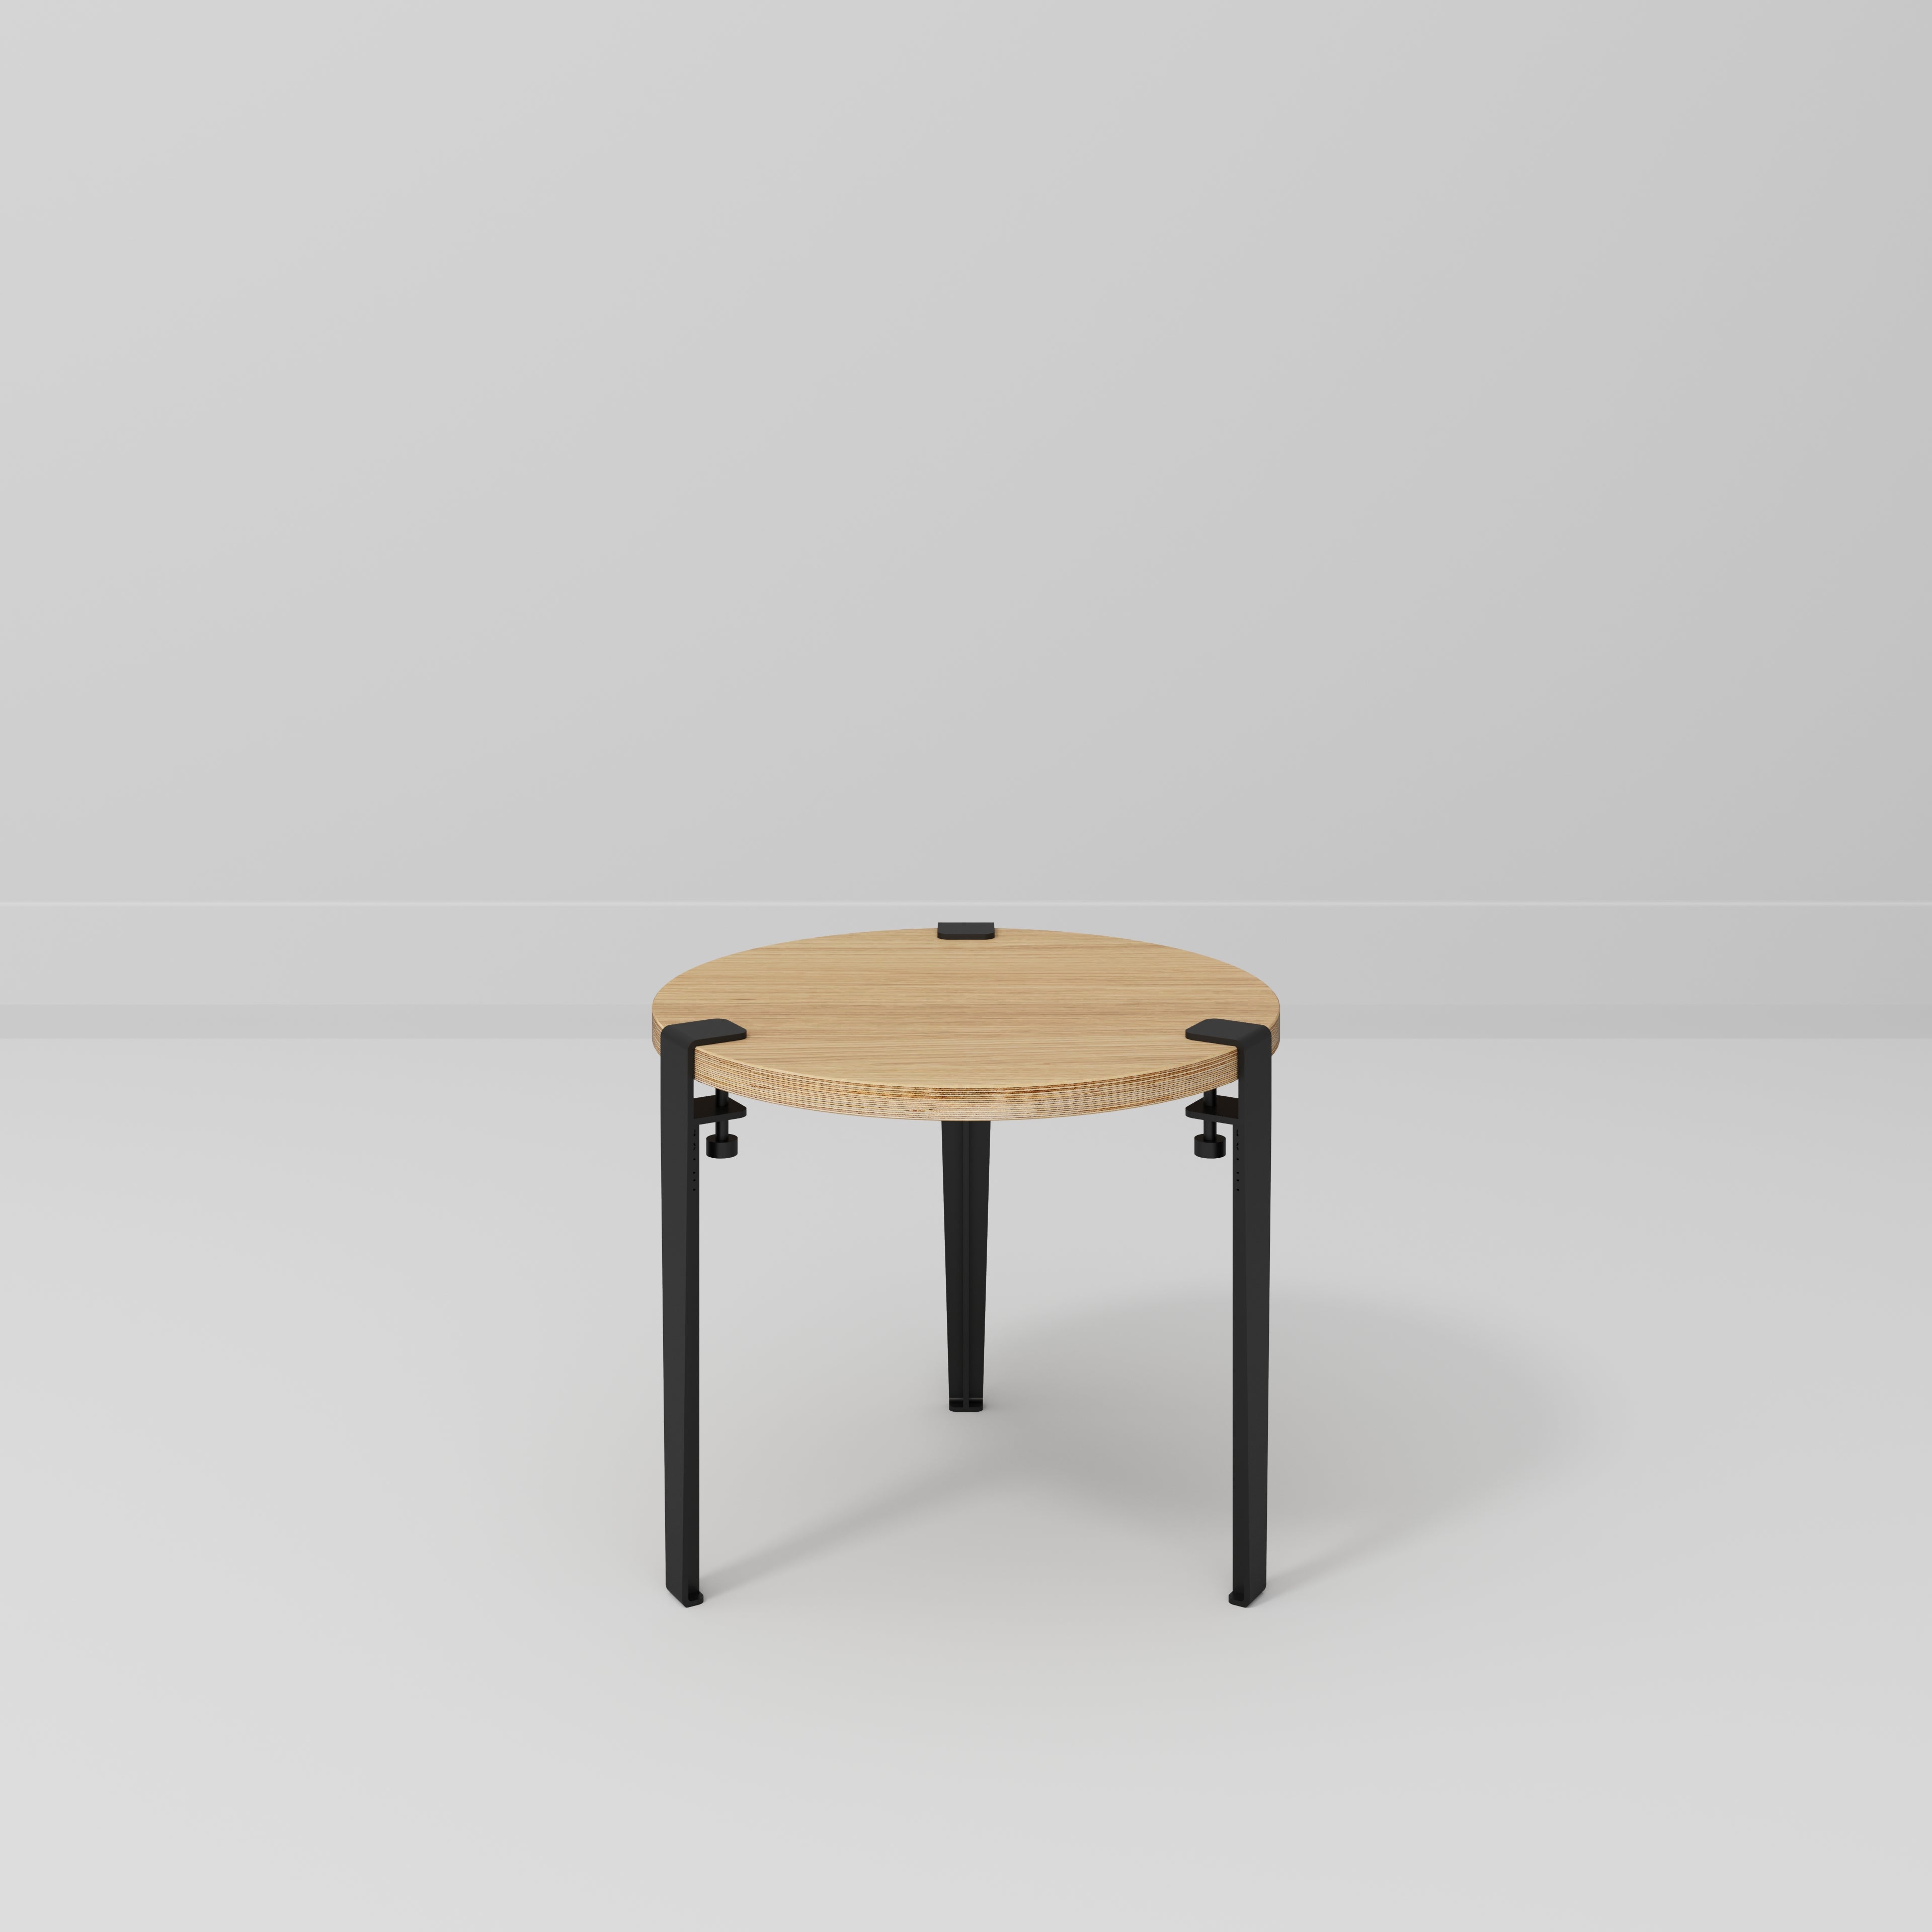 Round Side Table with Black Tiptoe Legs - Plywood Oak - 500(dia) x 430(h)